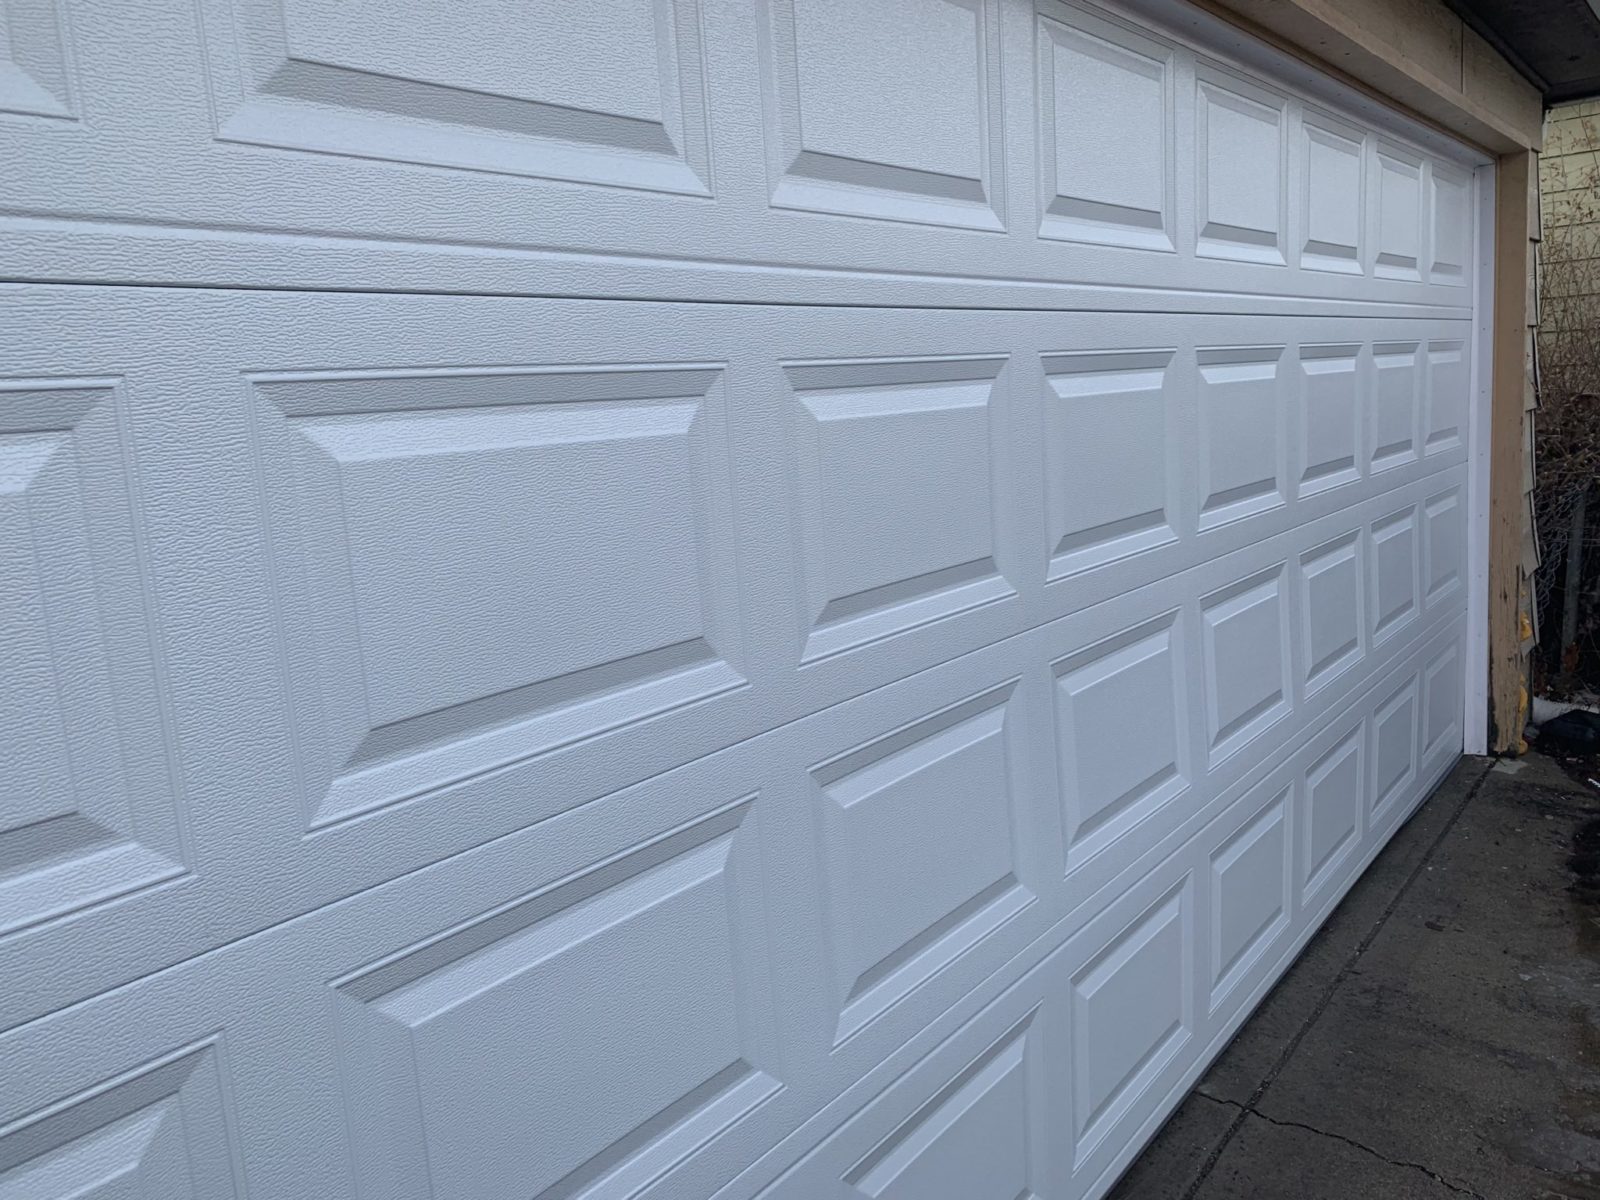 Garage Door Installation Chicago and Suburbs (call 773-869-2299) - 588FA856 189A 401A B7FC 6368603EB293